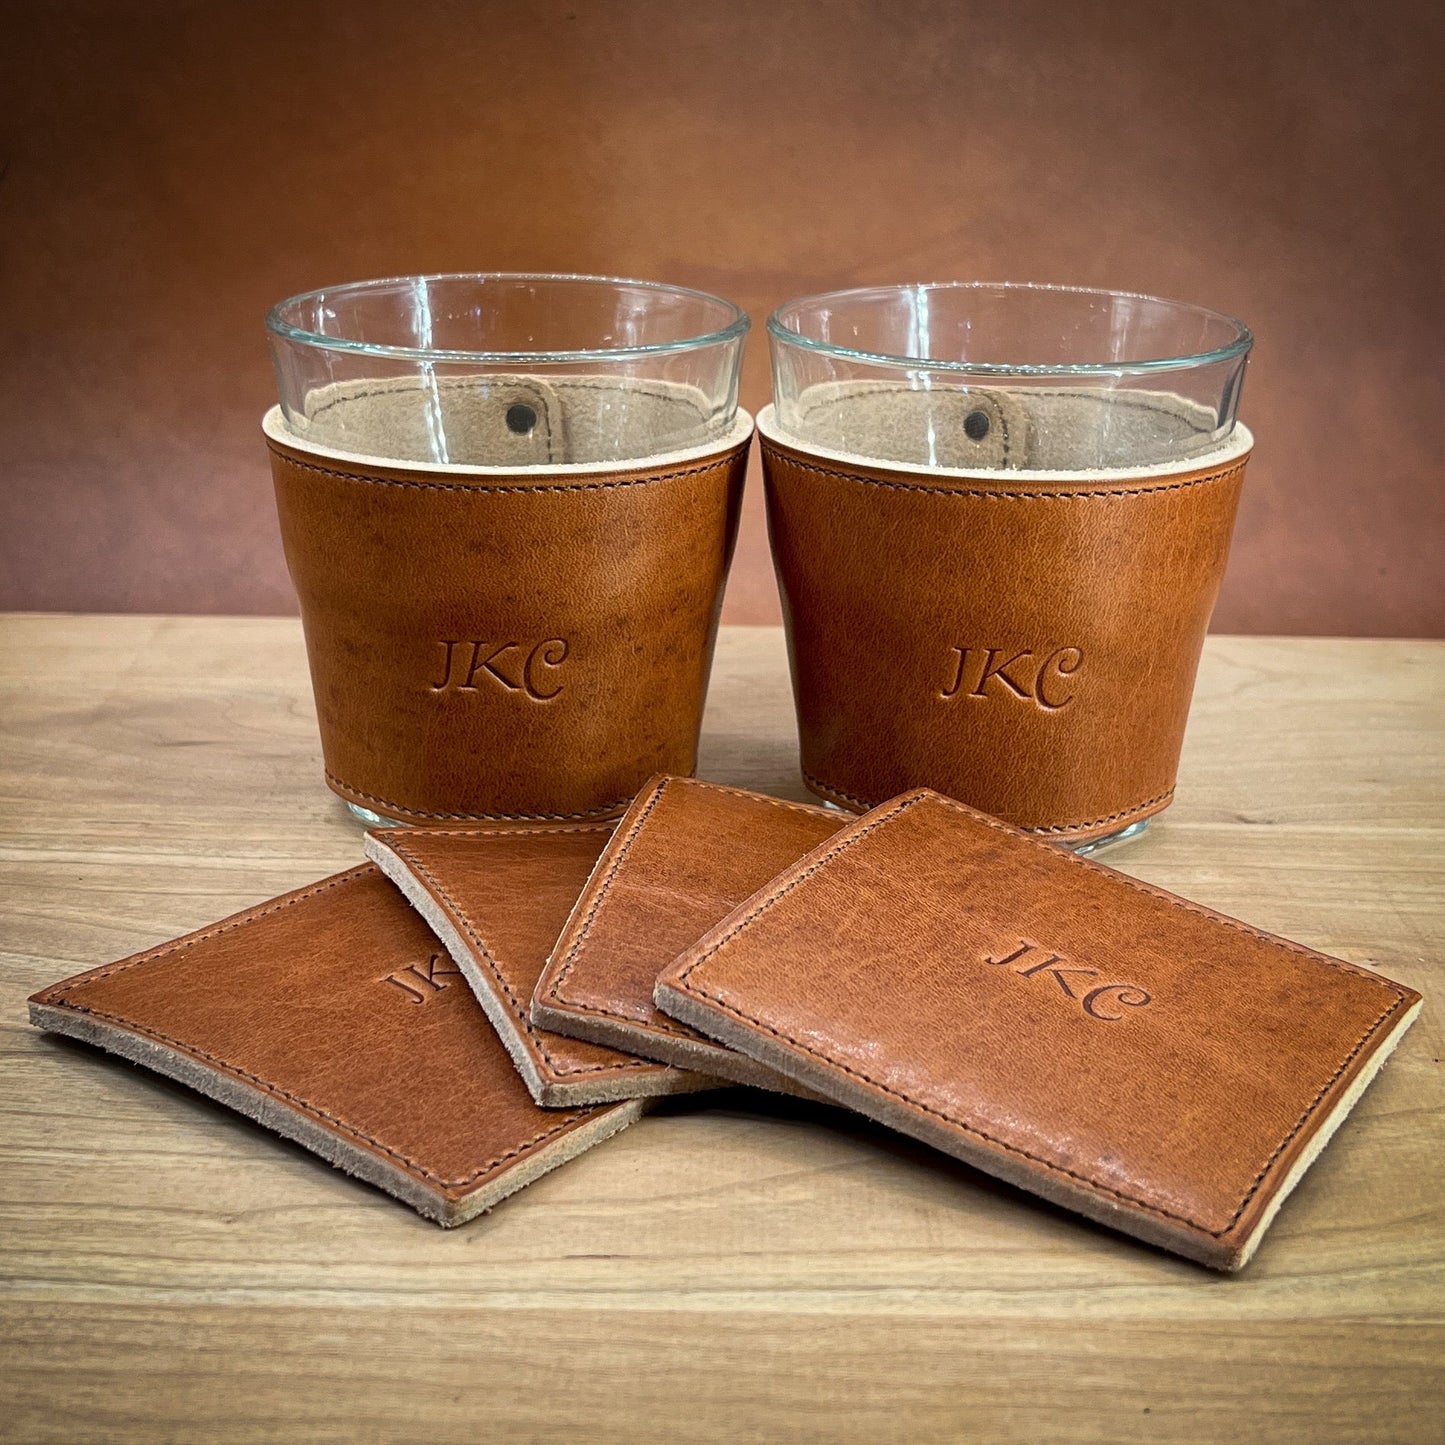 Custom Horween Leather Wrapped Glassware in Premium Horween Leather | Handmade to Order in Houston TX